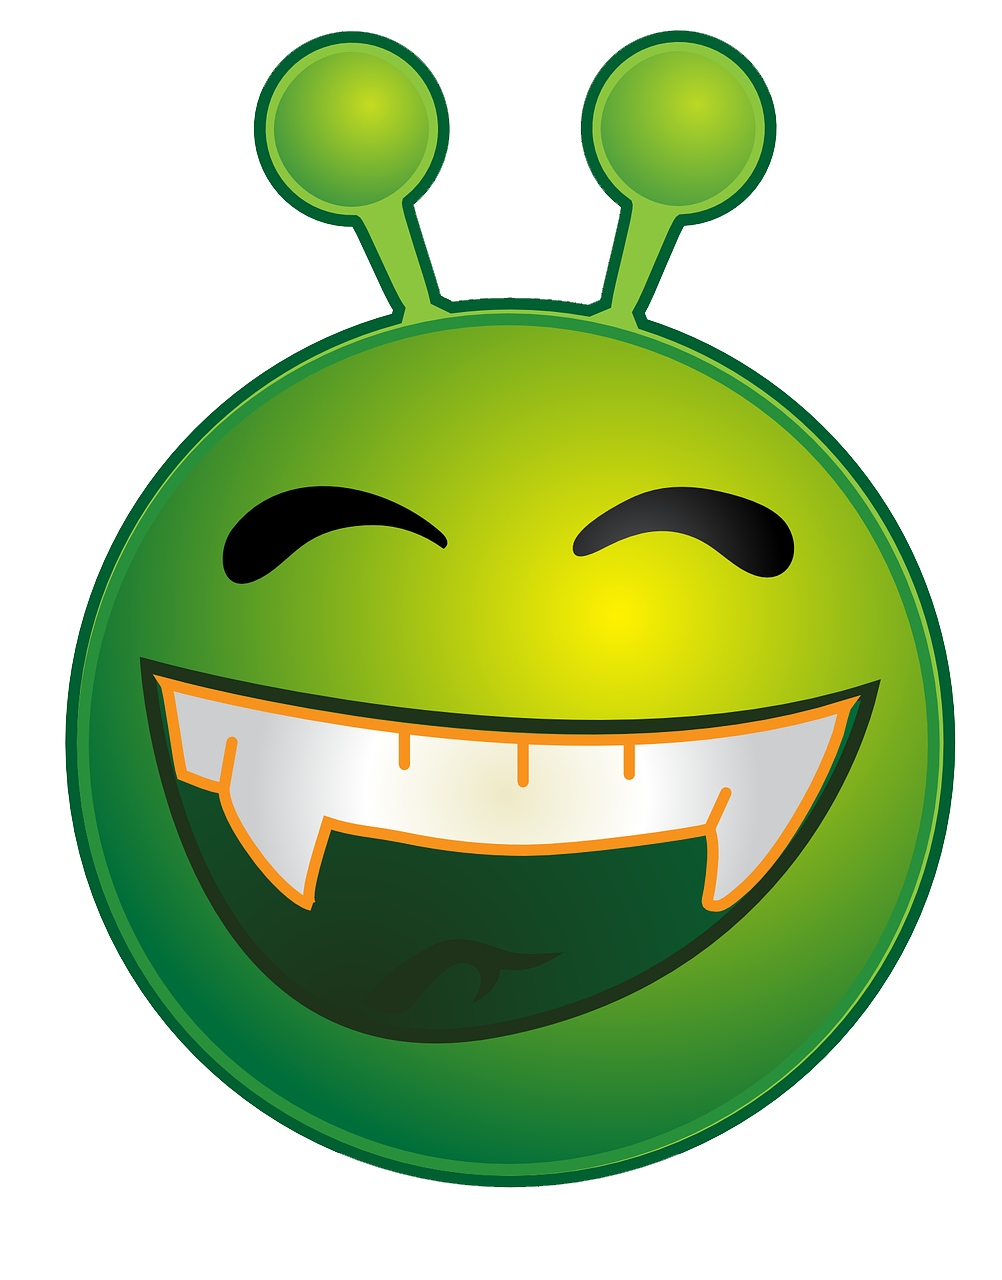 A Green Cartoon Face With Teeth And Eyes